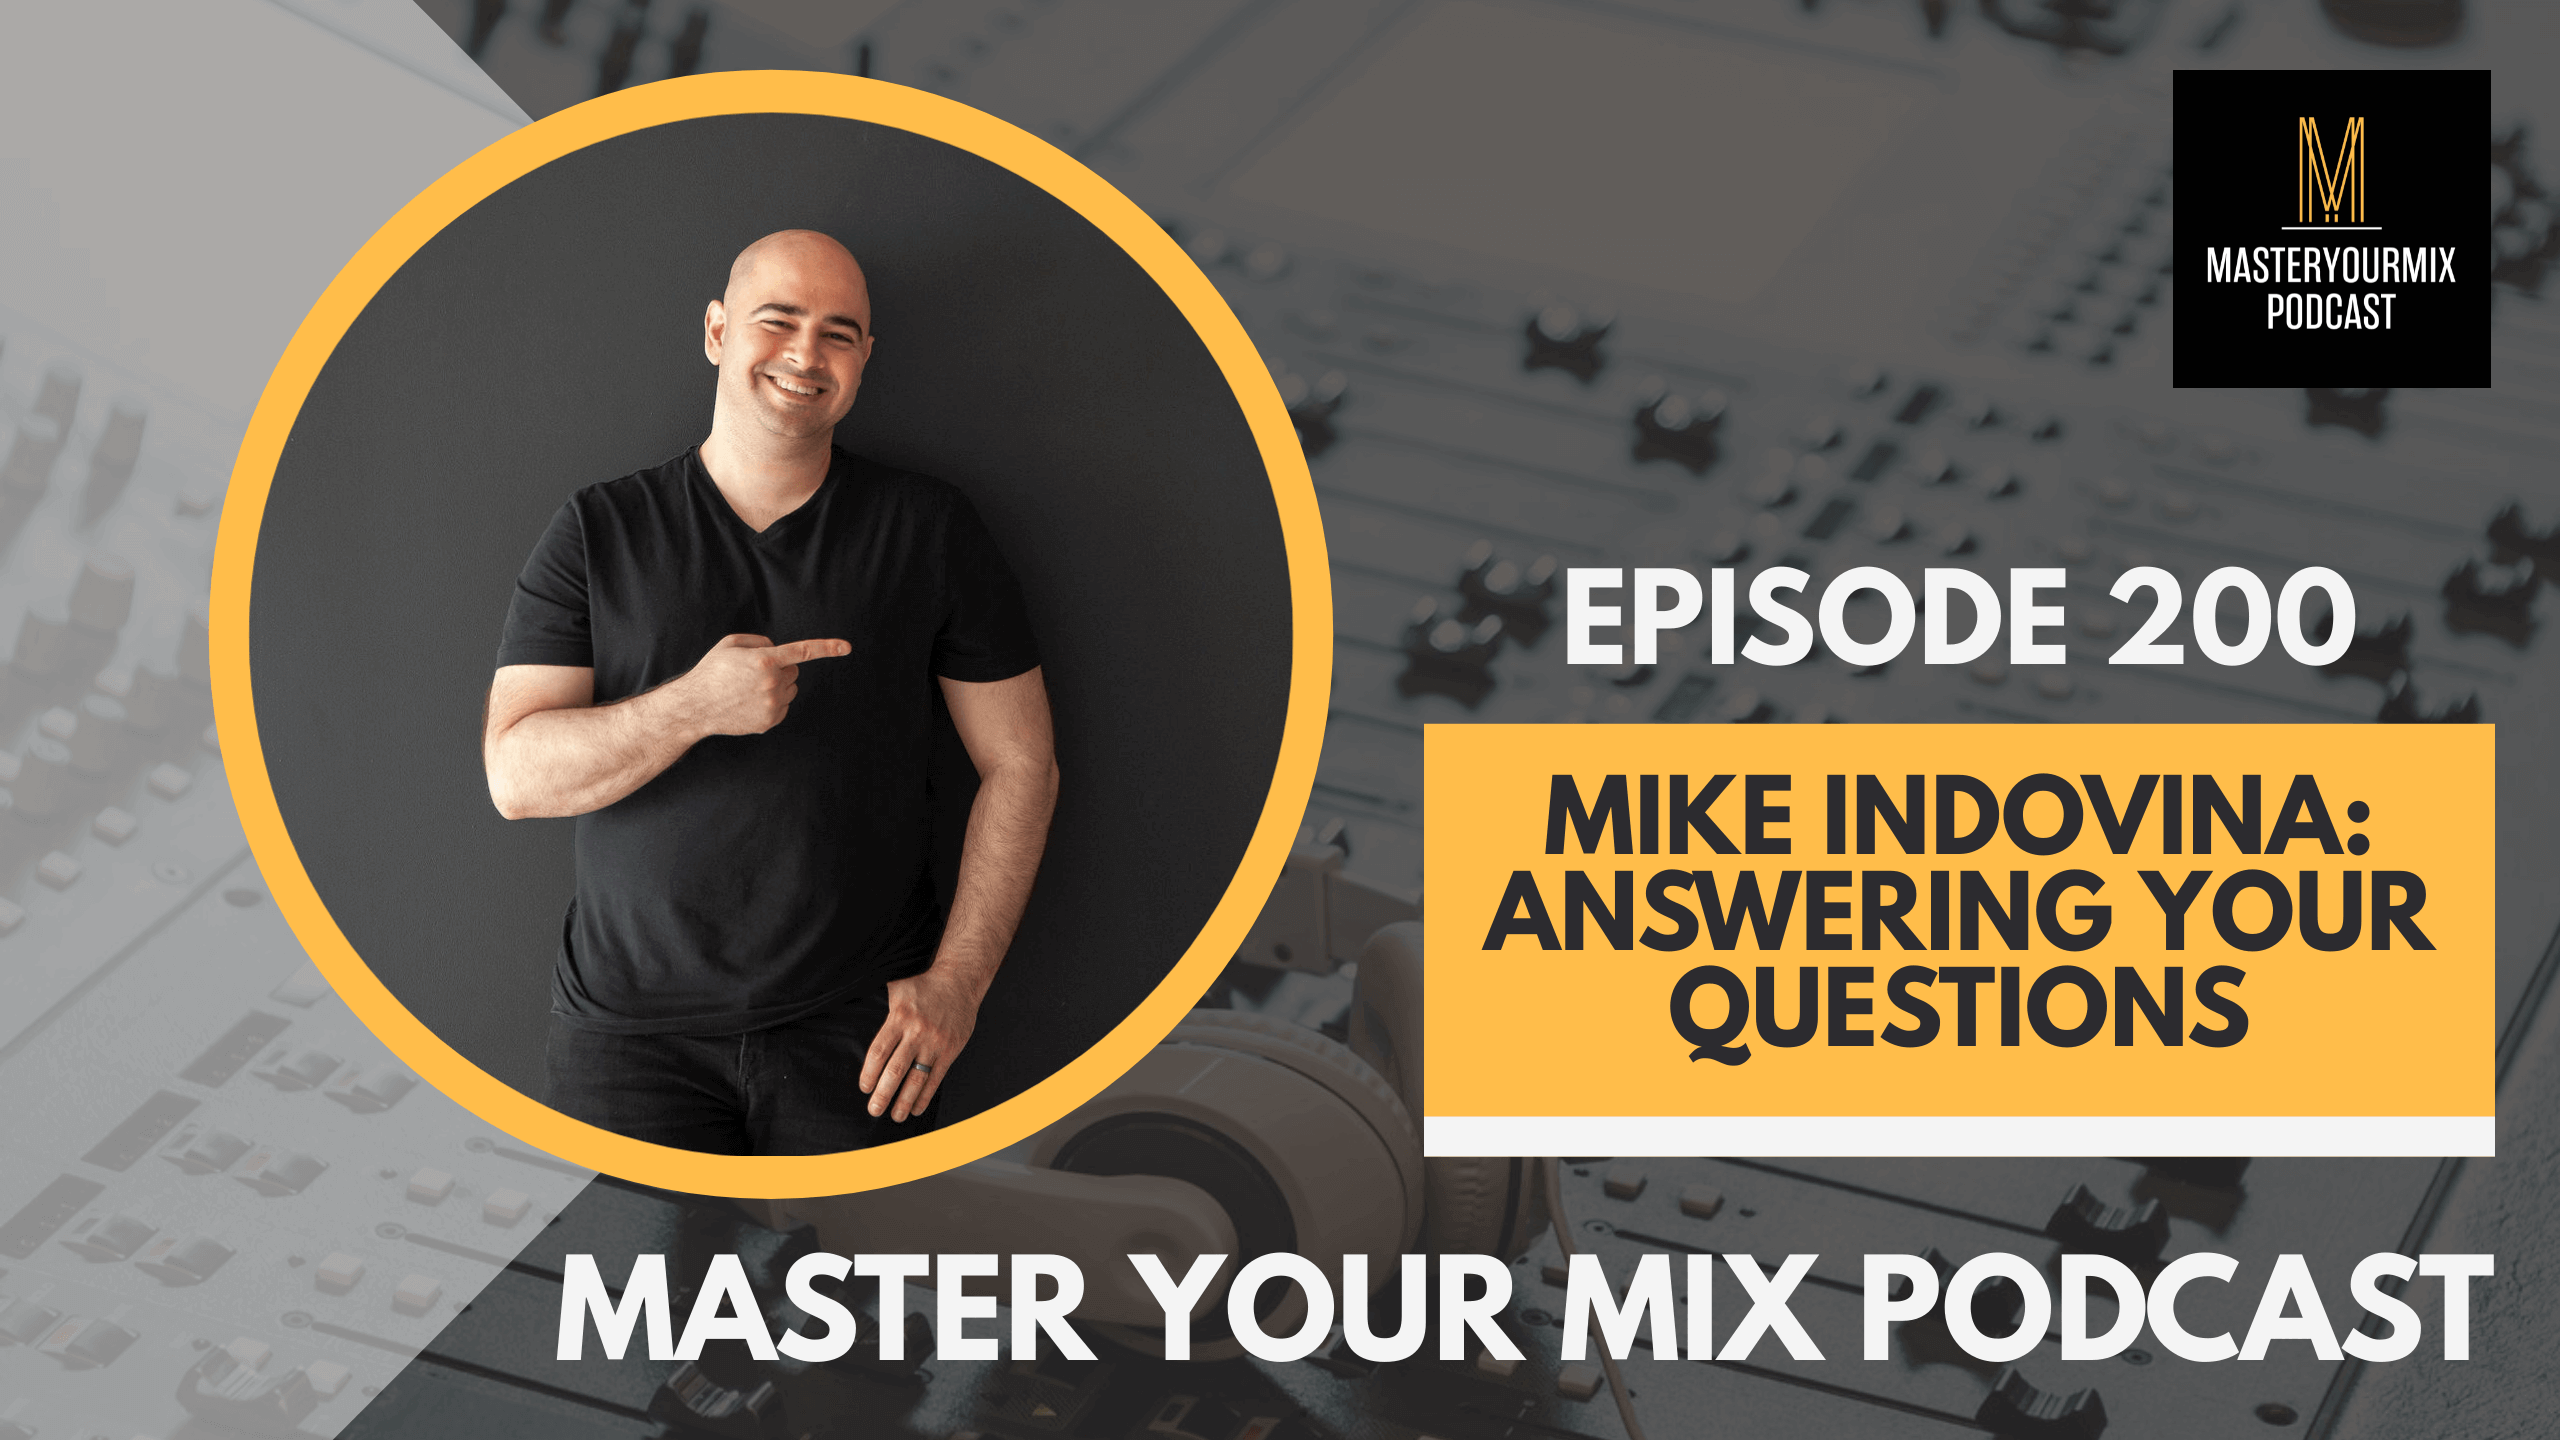 master your mix podcast, ep 200 mike indovina